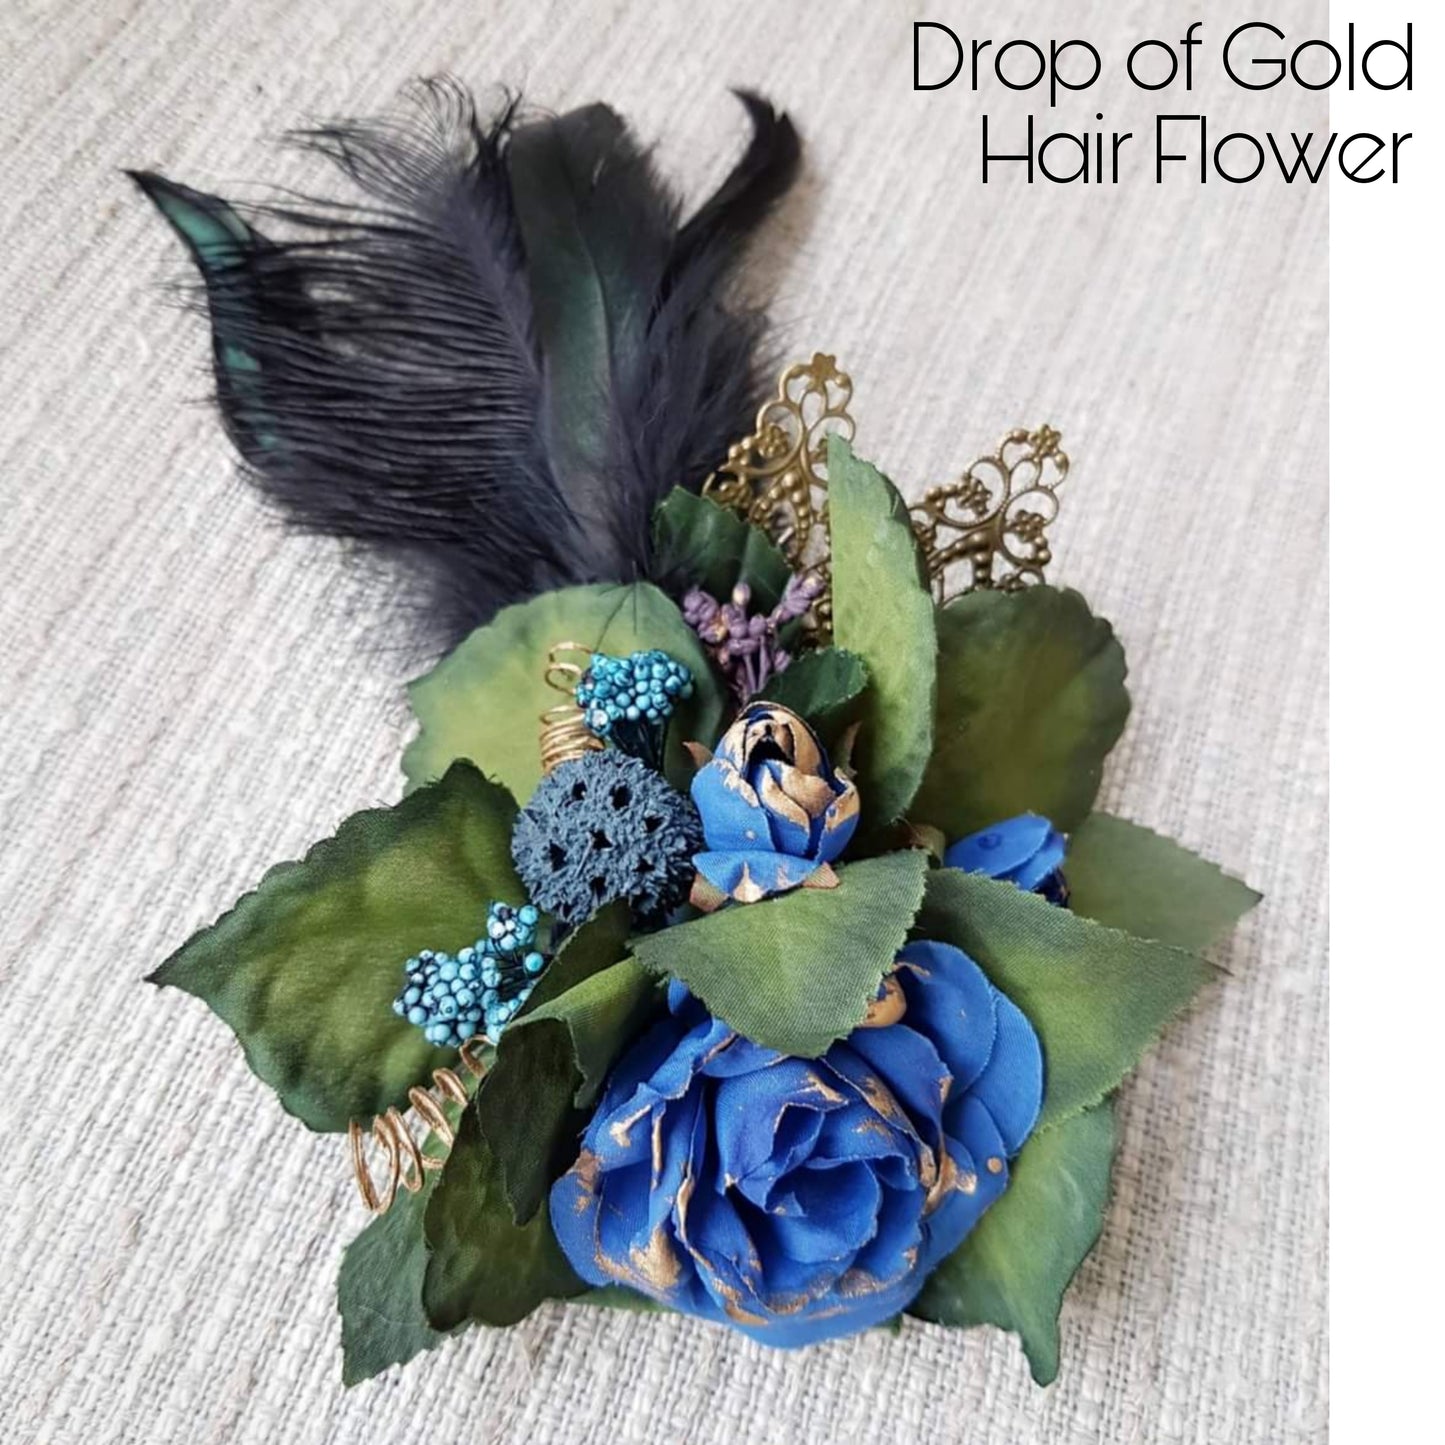 The Drop of Gold Hair Flower